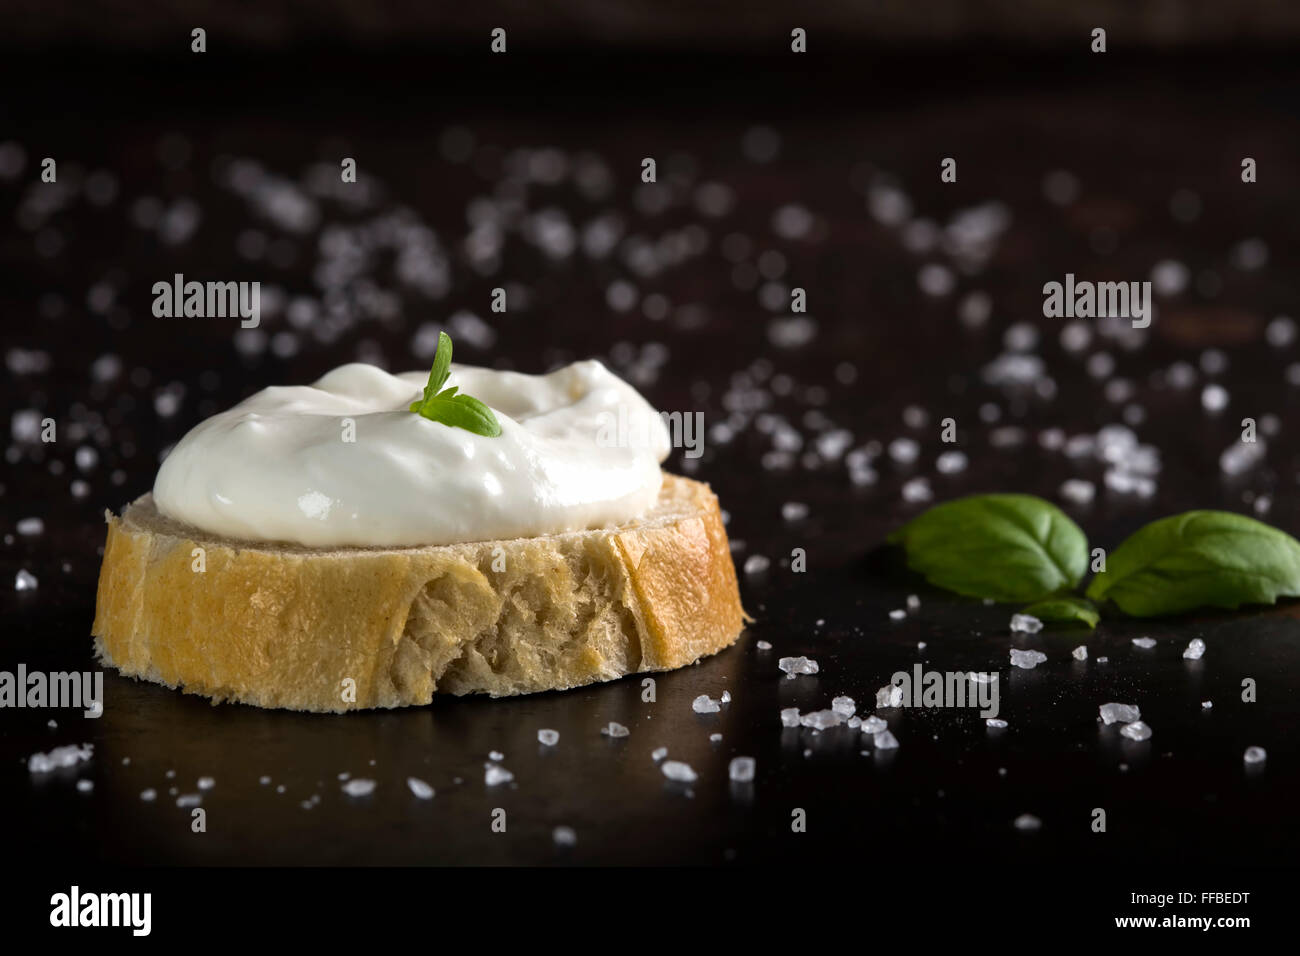 Cream cheese with herbs and seasoning on a slice of fresh rye bread Stock Photo